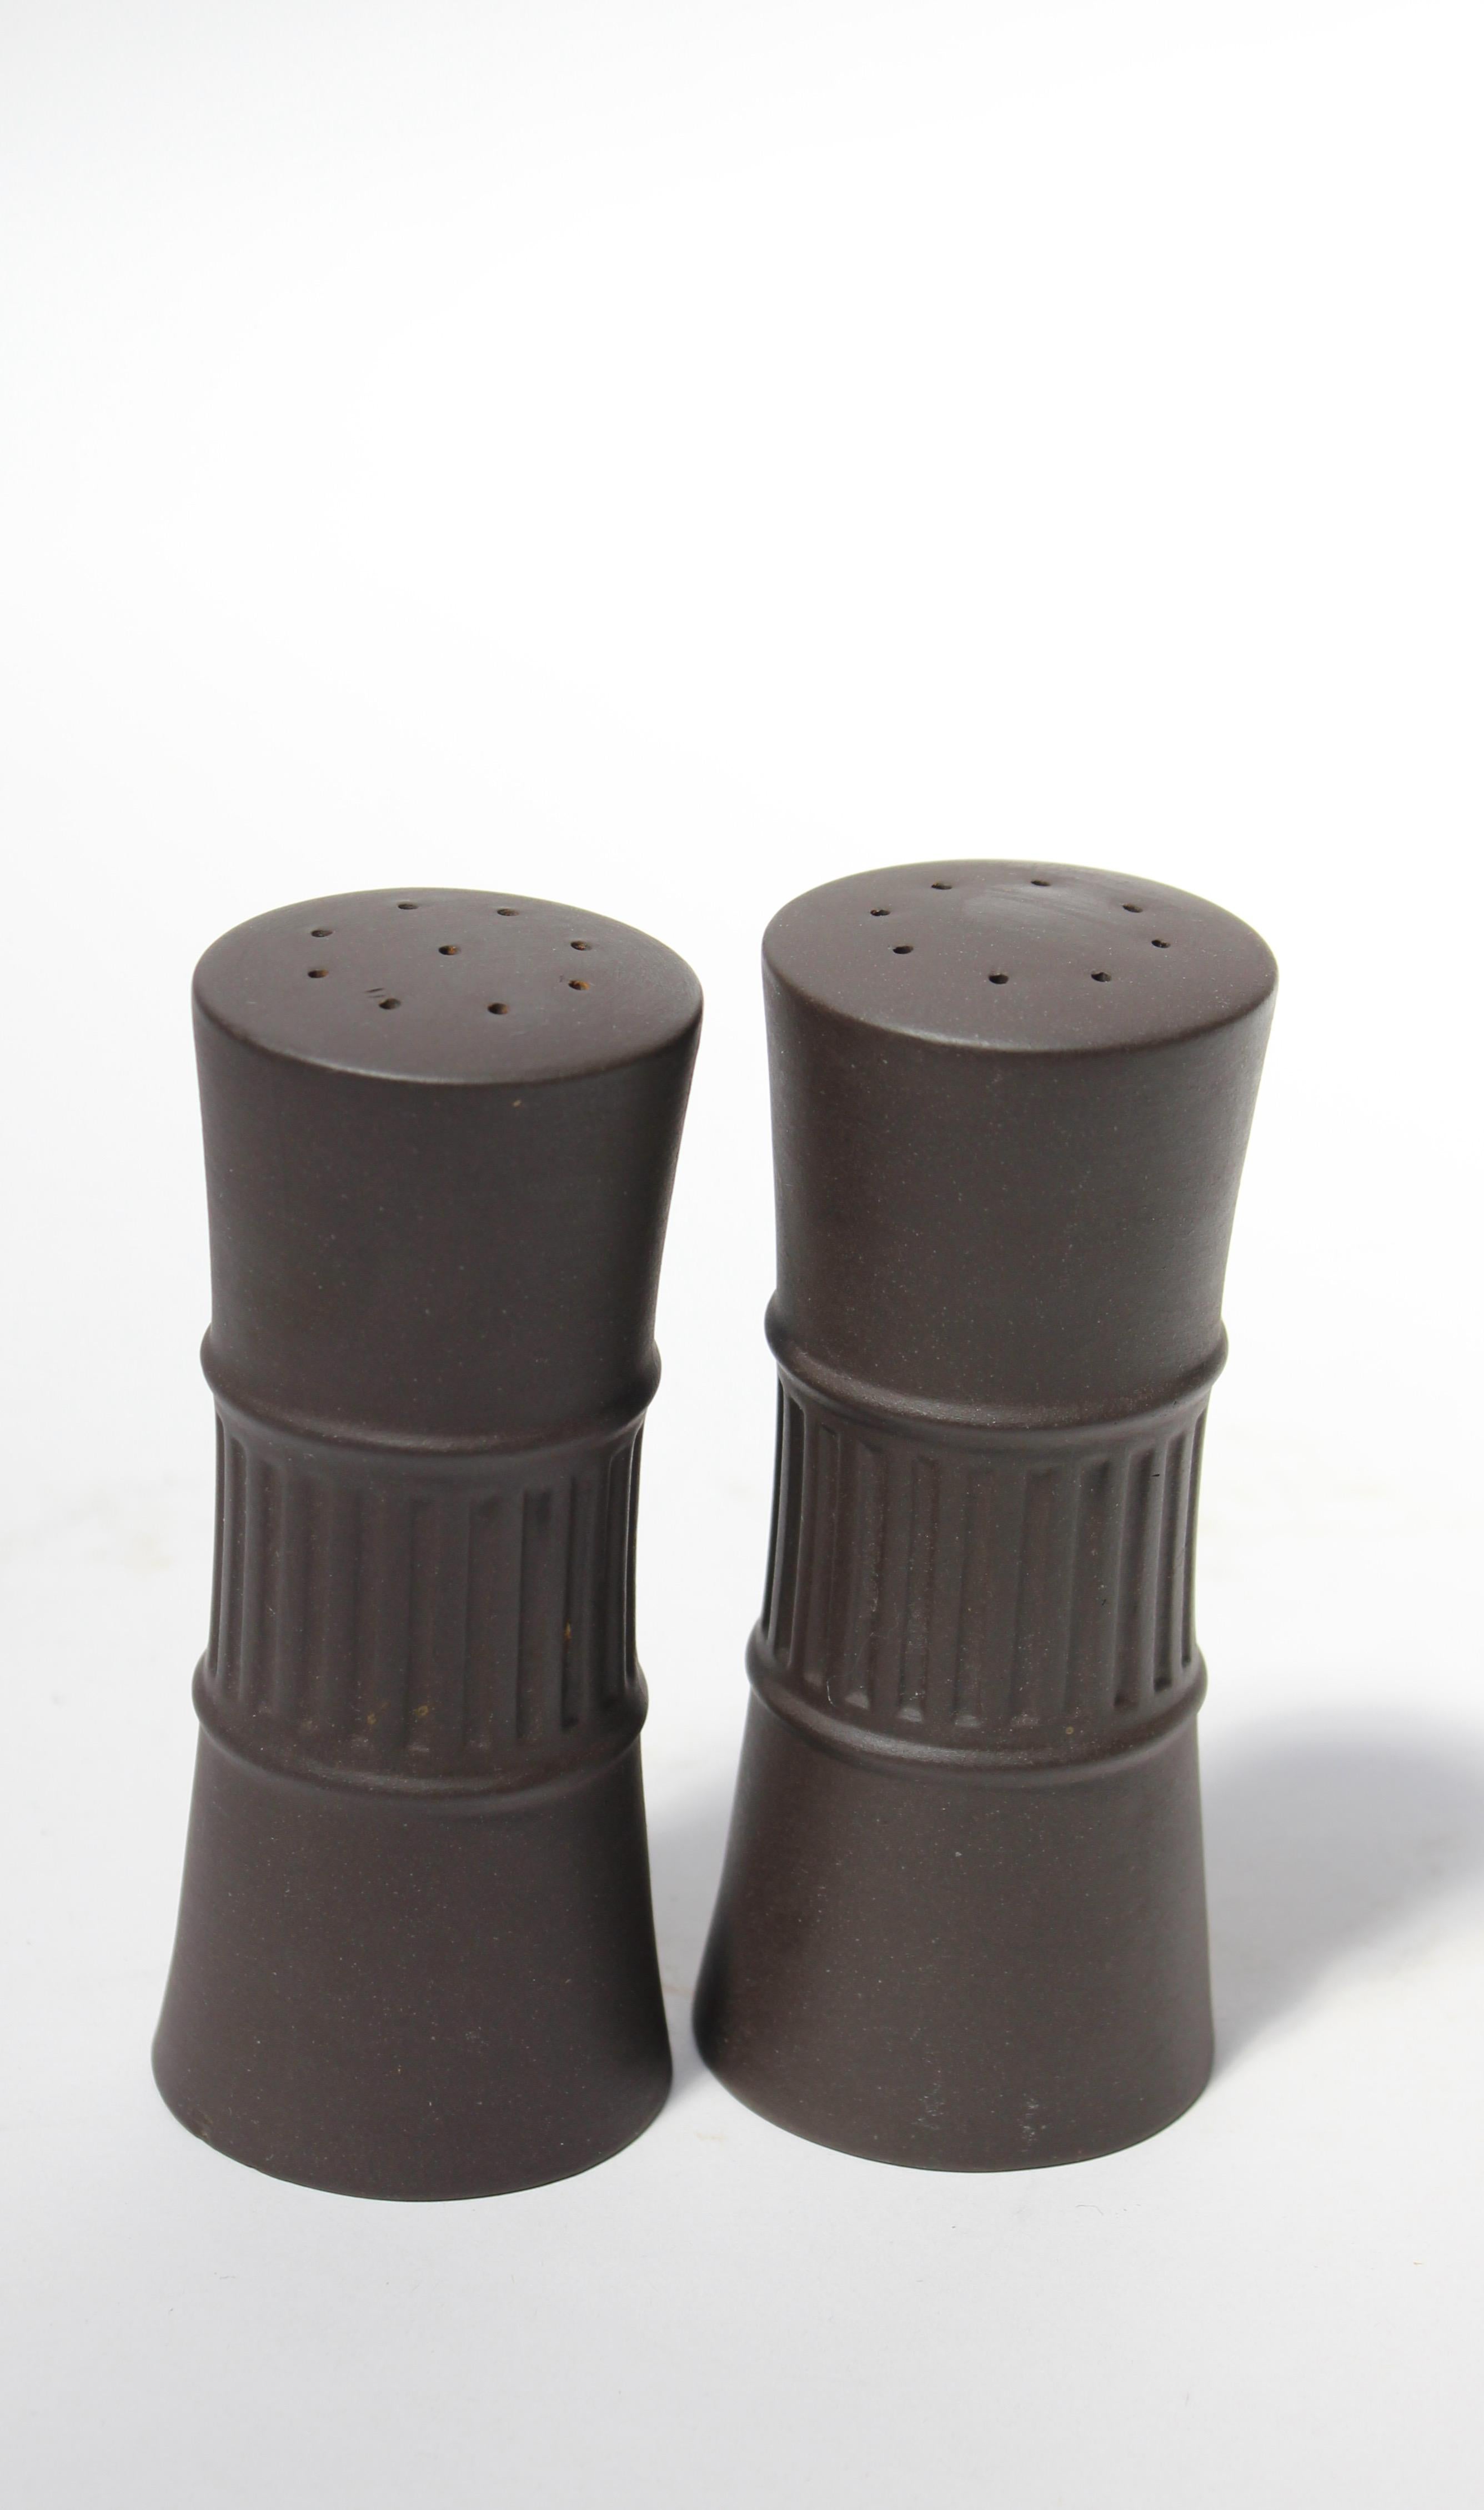 Danish 'Flamestone' earthenware salt and pepper shakers by Jens H. Quistgaard for Dansk designs, circa 1958-1964. Features the Flamestone signature slate glaze with striated pattern (glaze can appear brown, lighting depending). 
Elegant, design with